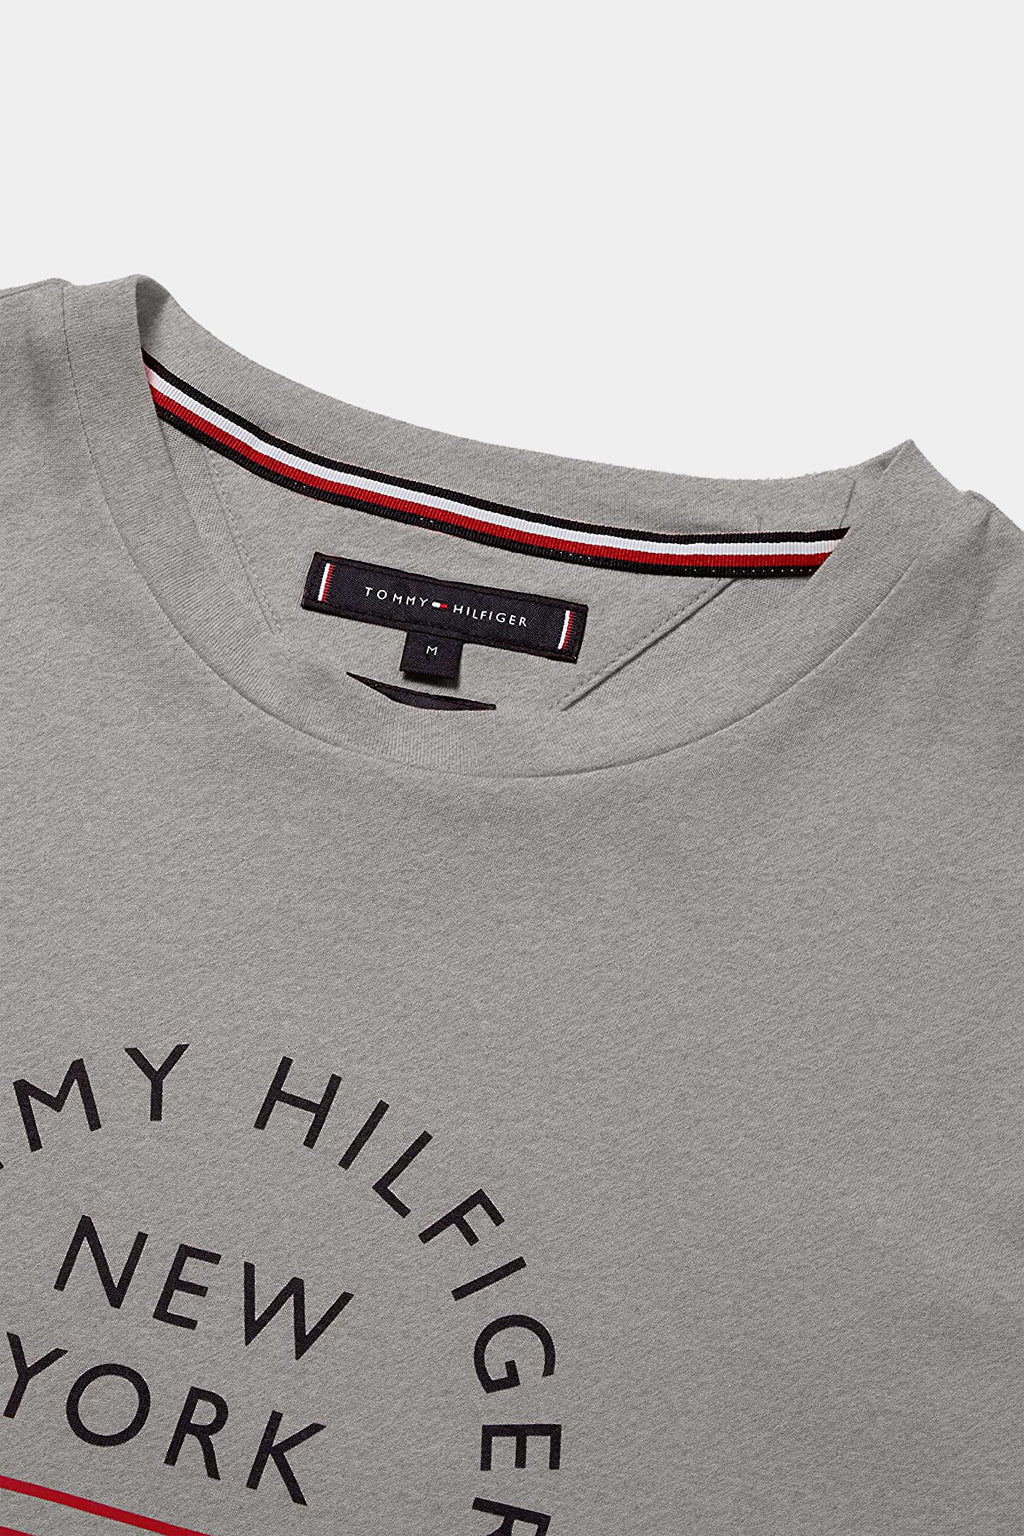 Tommy Hilfiger - Corp Arch Tee